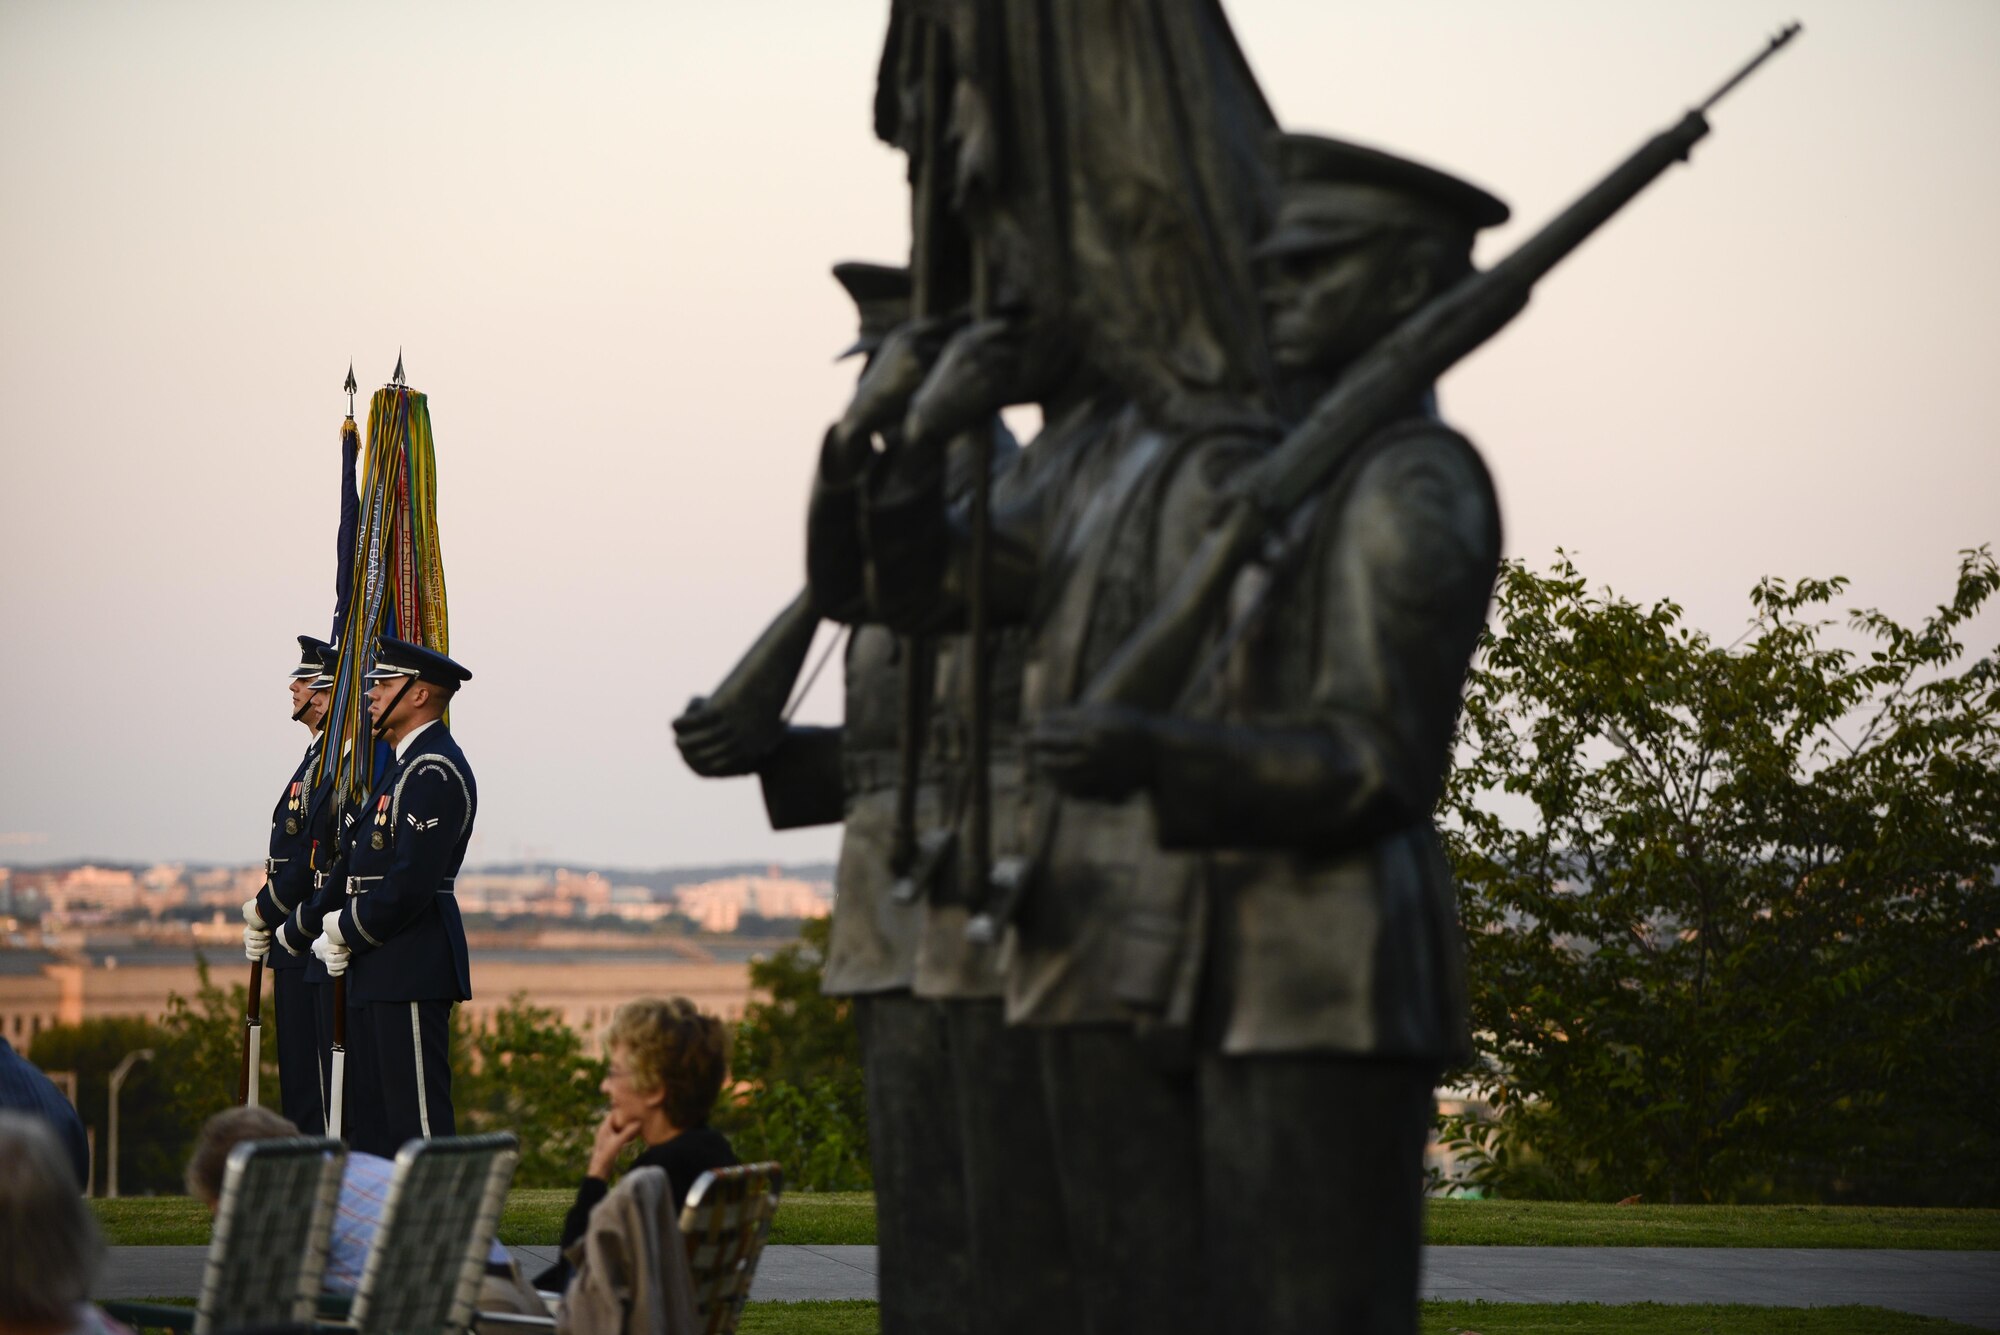 Members of the Air Force Honor Guard standby to present the colors during a wreath-laying ceremony, a four-ship P-51 Mustang flyover and the Air Force Band concert commemorating the 70th anniversary of the end of World War II, Aug. 14, 2015 at the Air Force Memorial in Arlington, Virginia. (Air Force photo/Tech. Sgt. Joshua L. DeMotts)